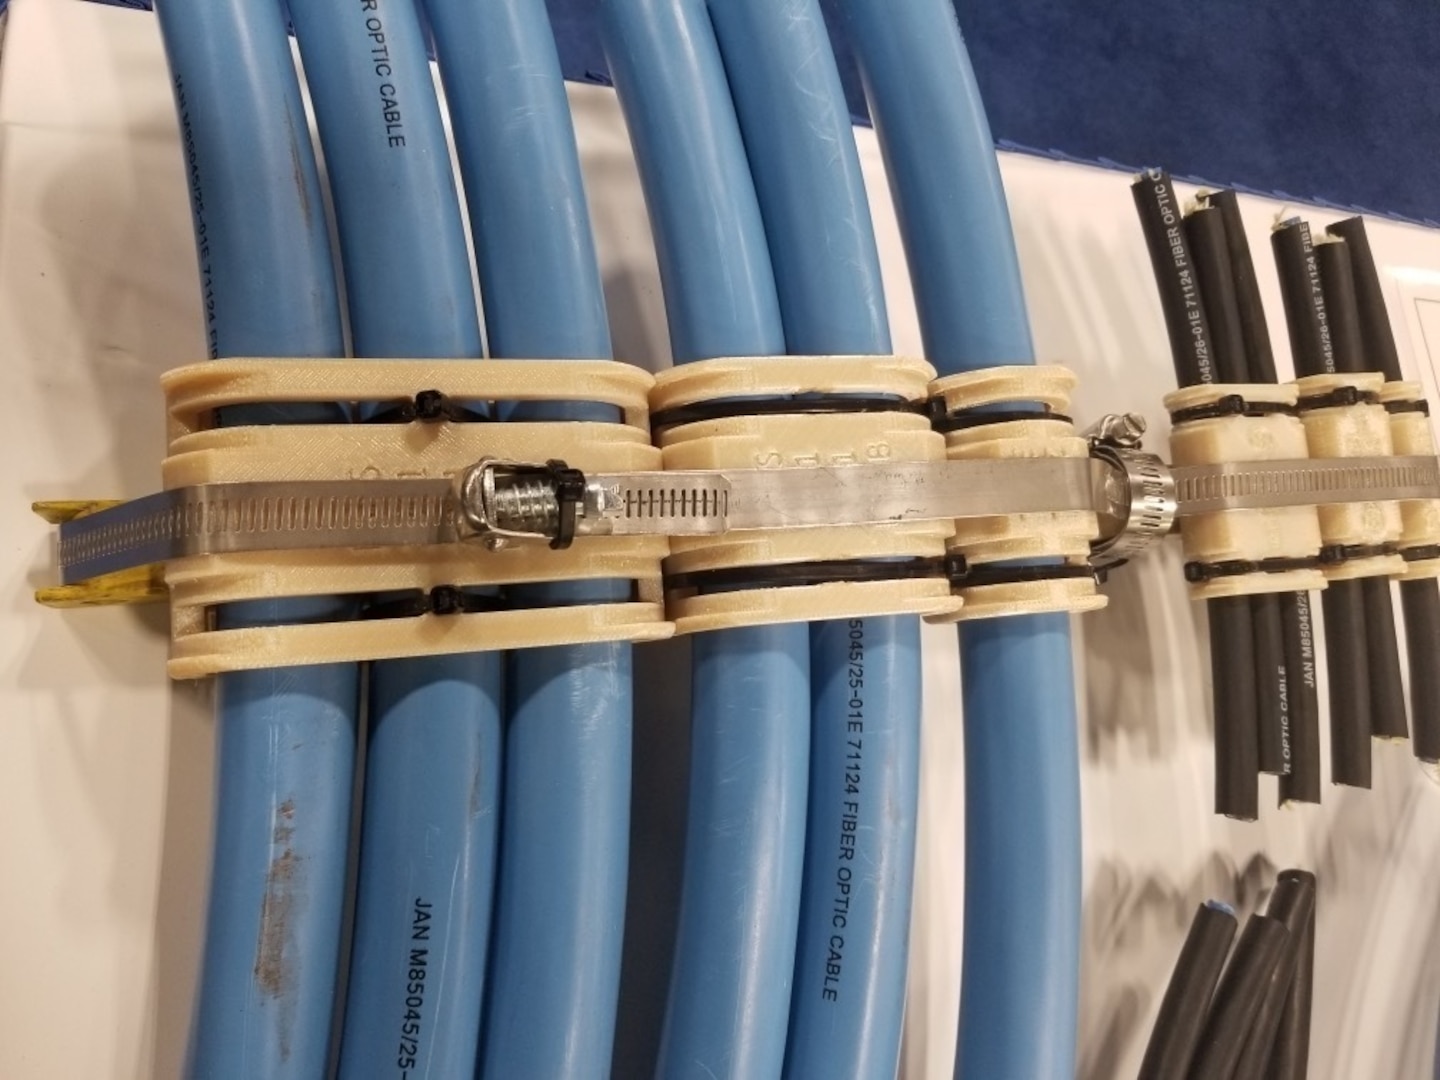 The thermoplastic blown optical fiber cable clamps designed by Brandon Rottle, nuclear general foreman, Shop 67, Marine Electronics, at Puget Sound Naval Shipyard & Intermediate Maintenance Facility.